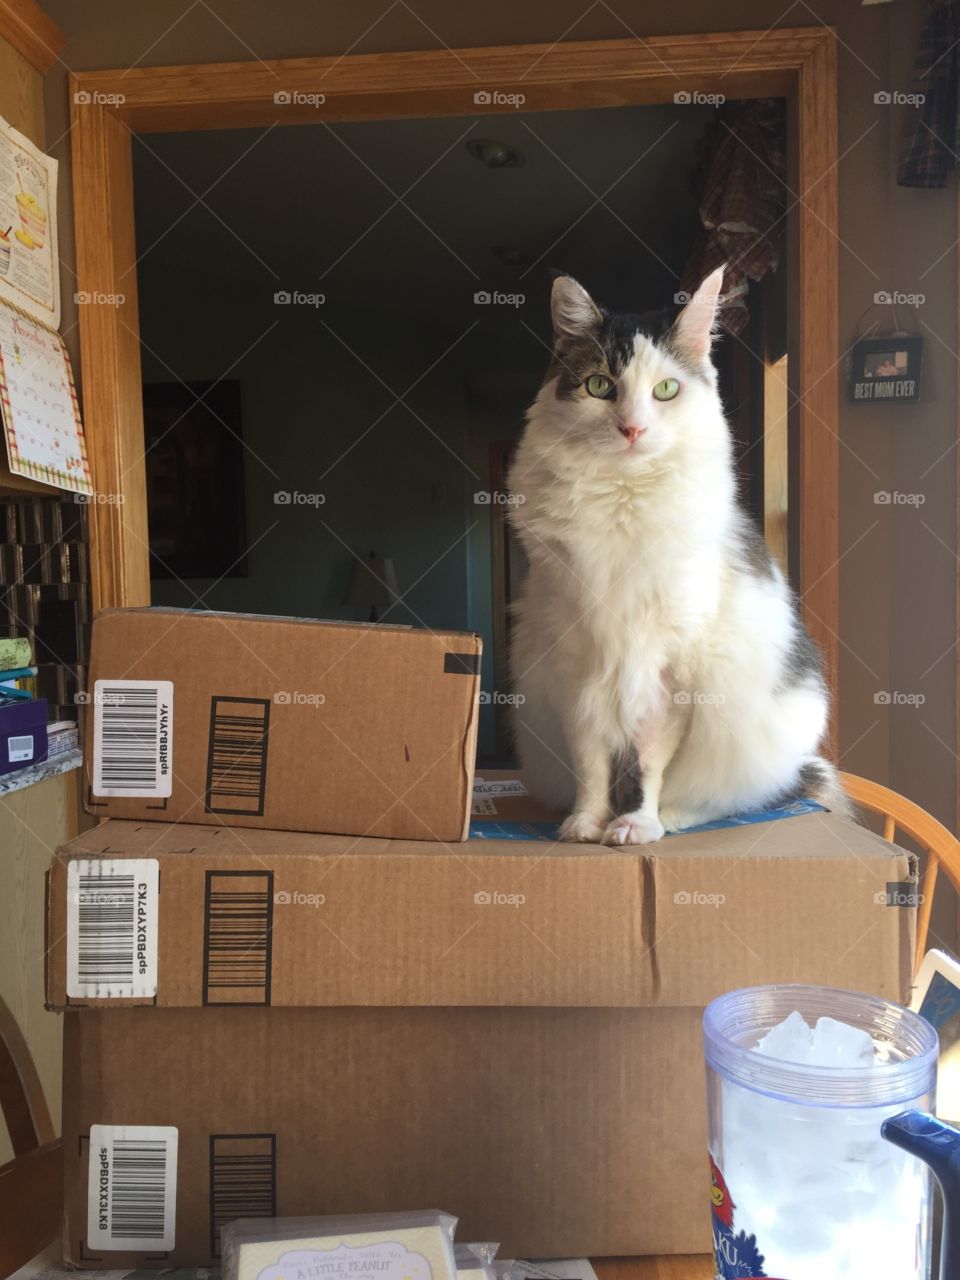 Cat on boxes